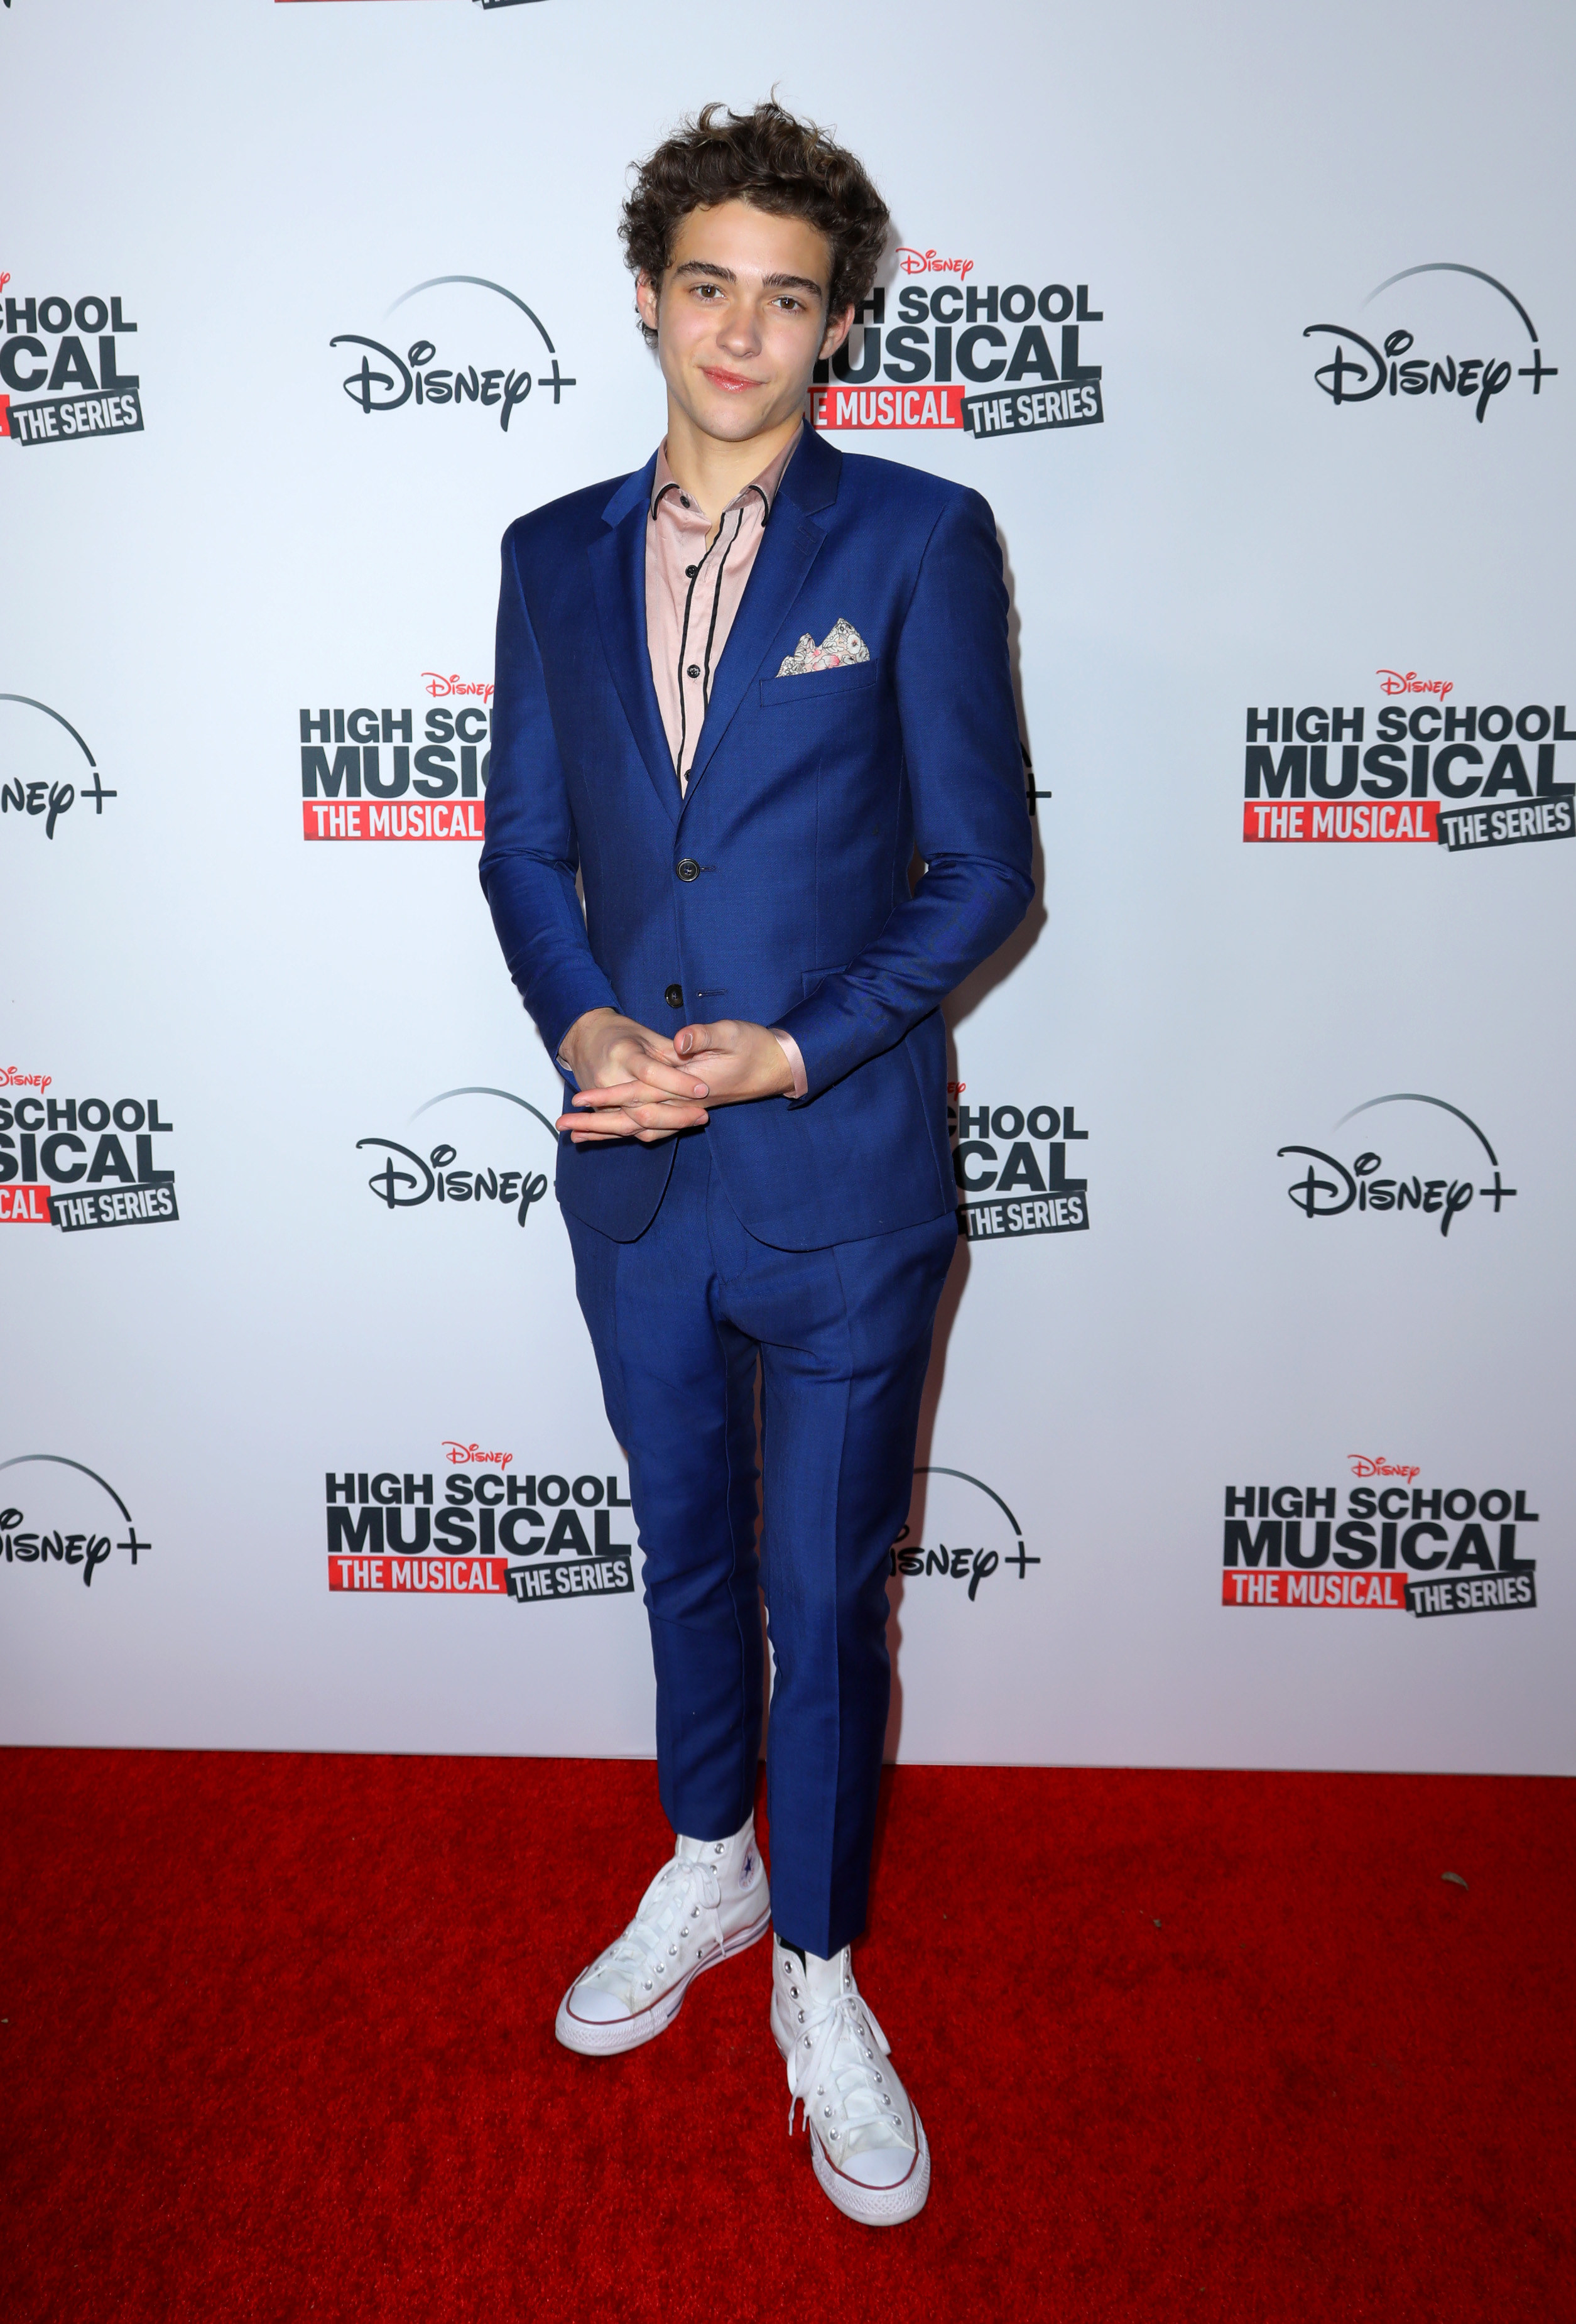 Joshua Bassett at the launch of the High School Musical: The Musical TV show in 2019